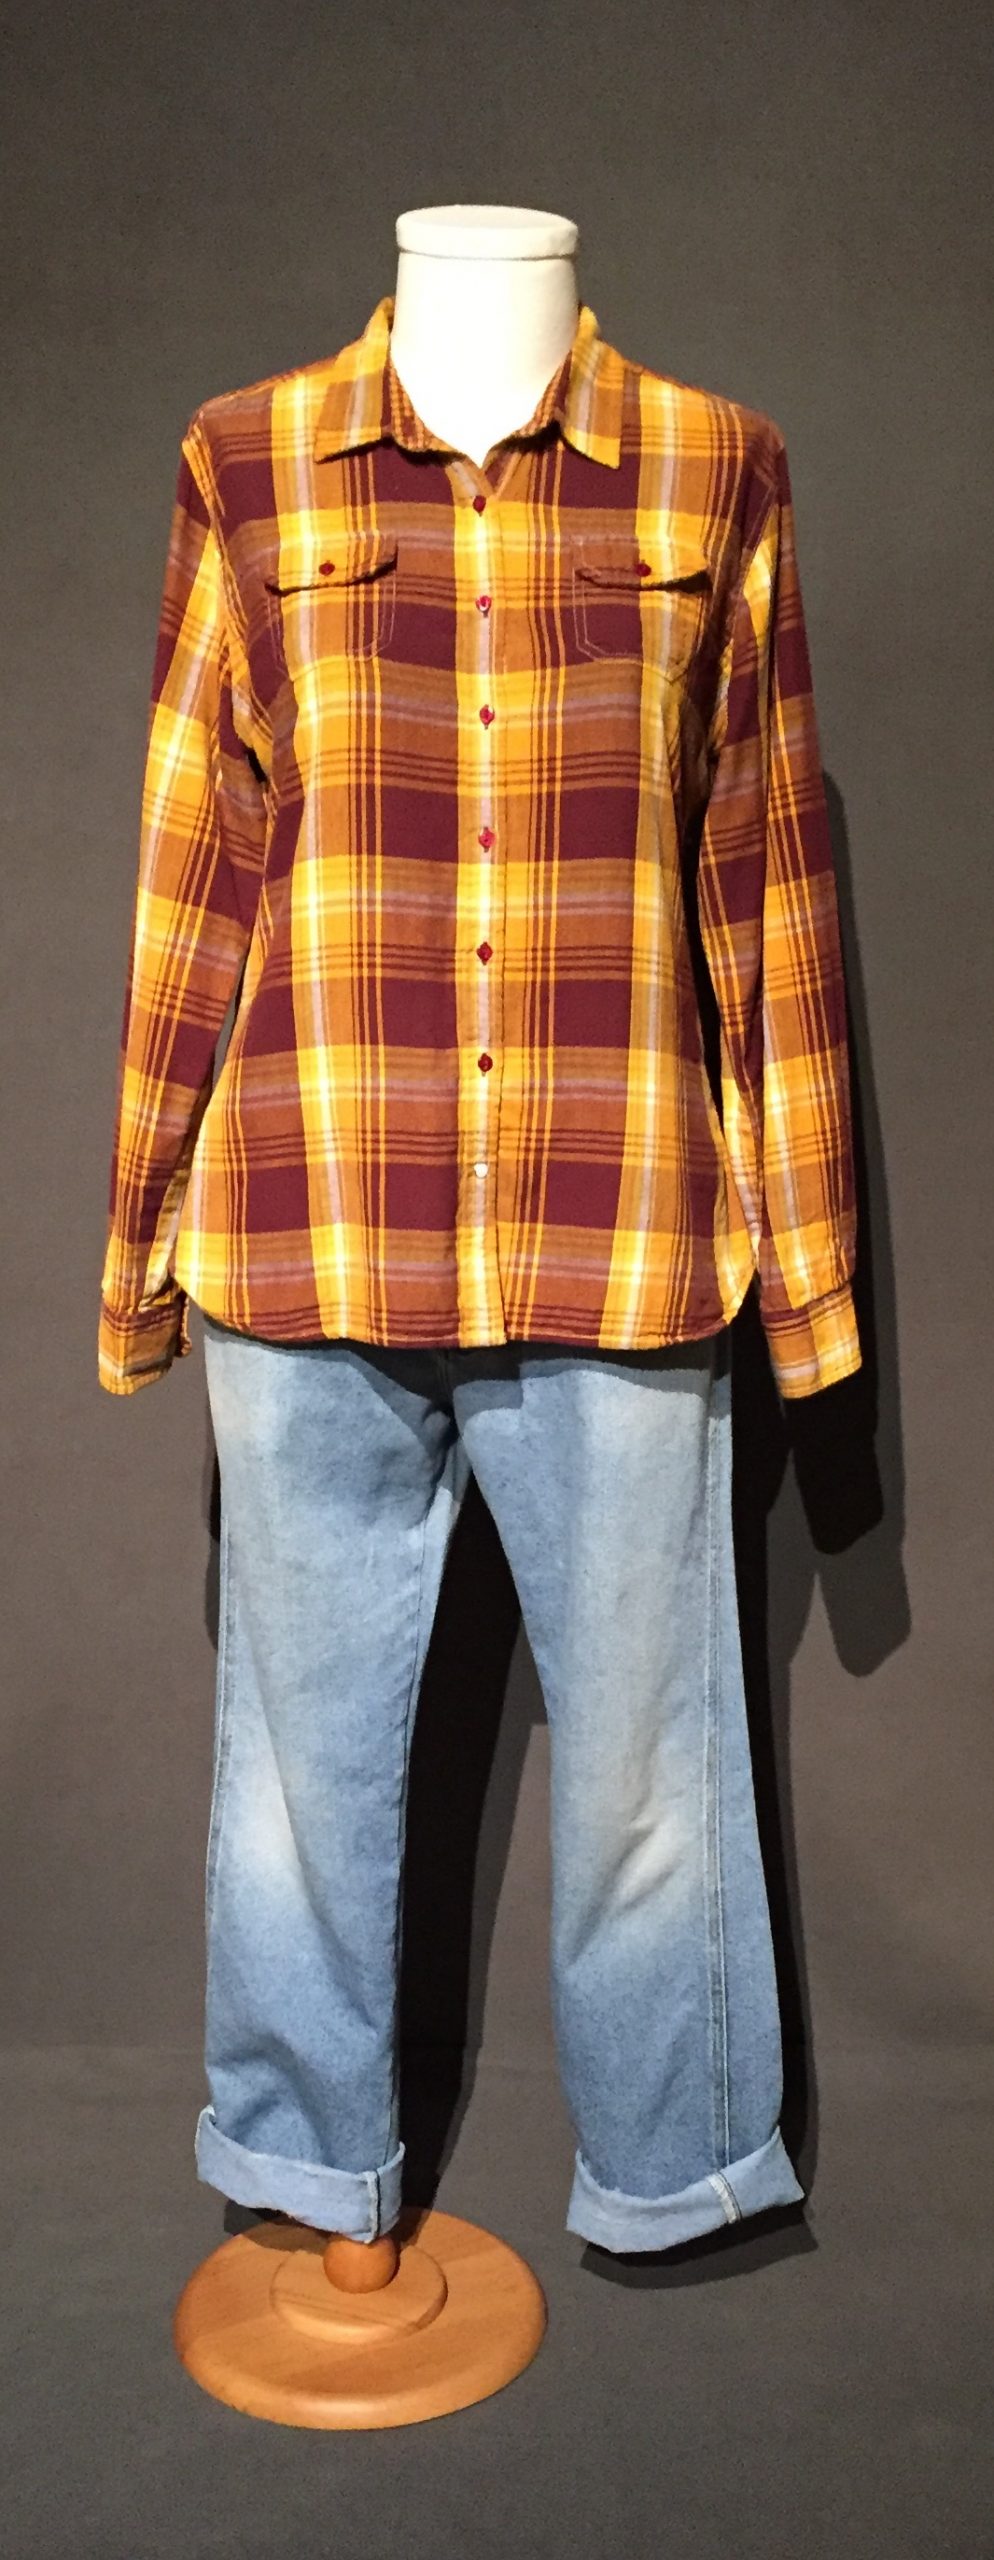 Yellow and brown plaid long sleeve button-down shirt.